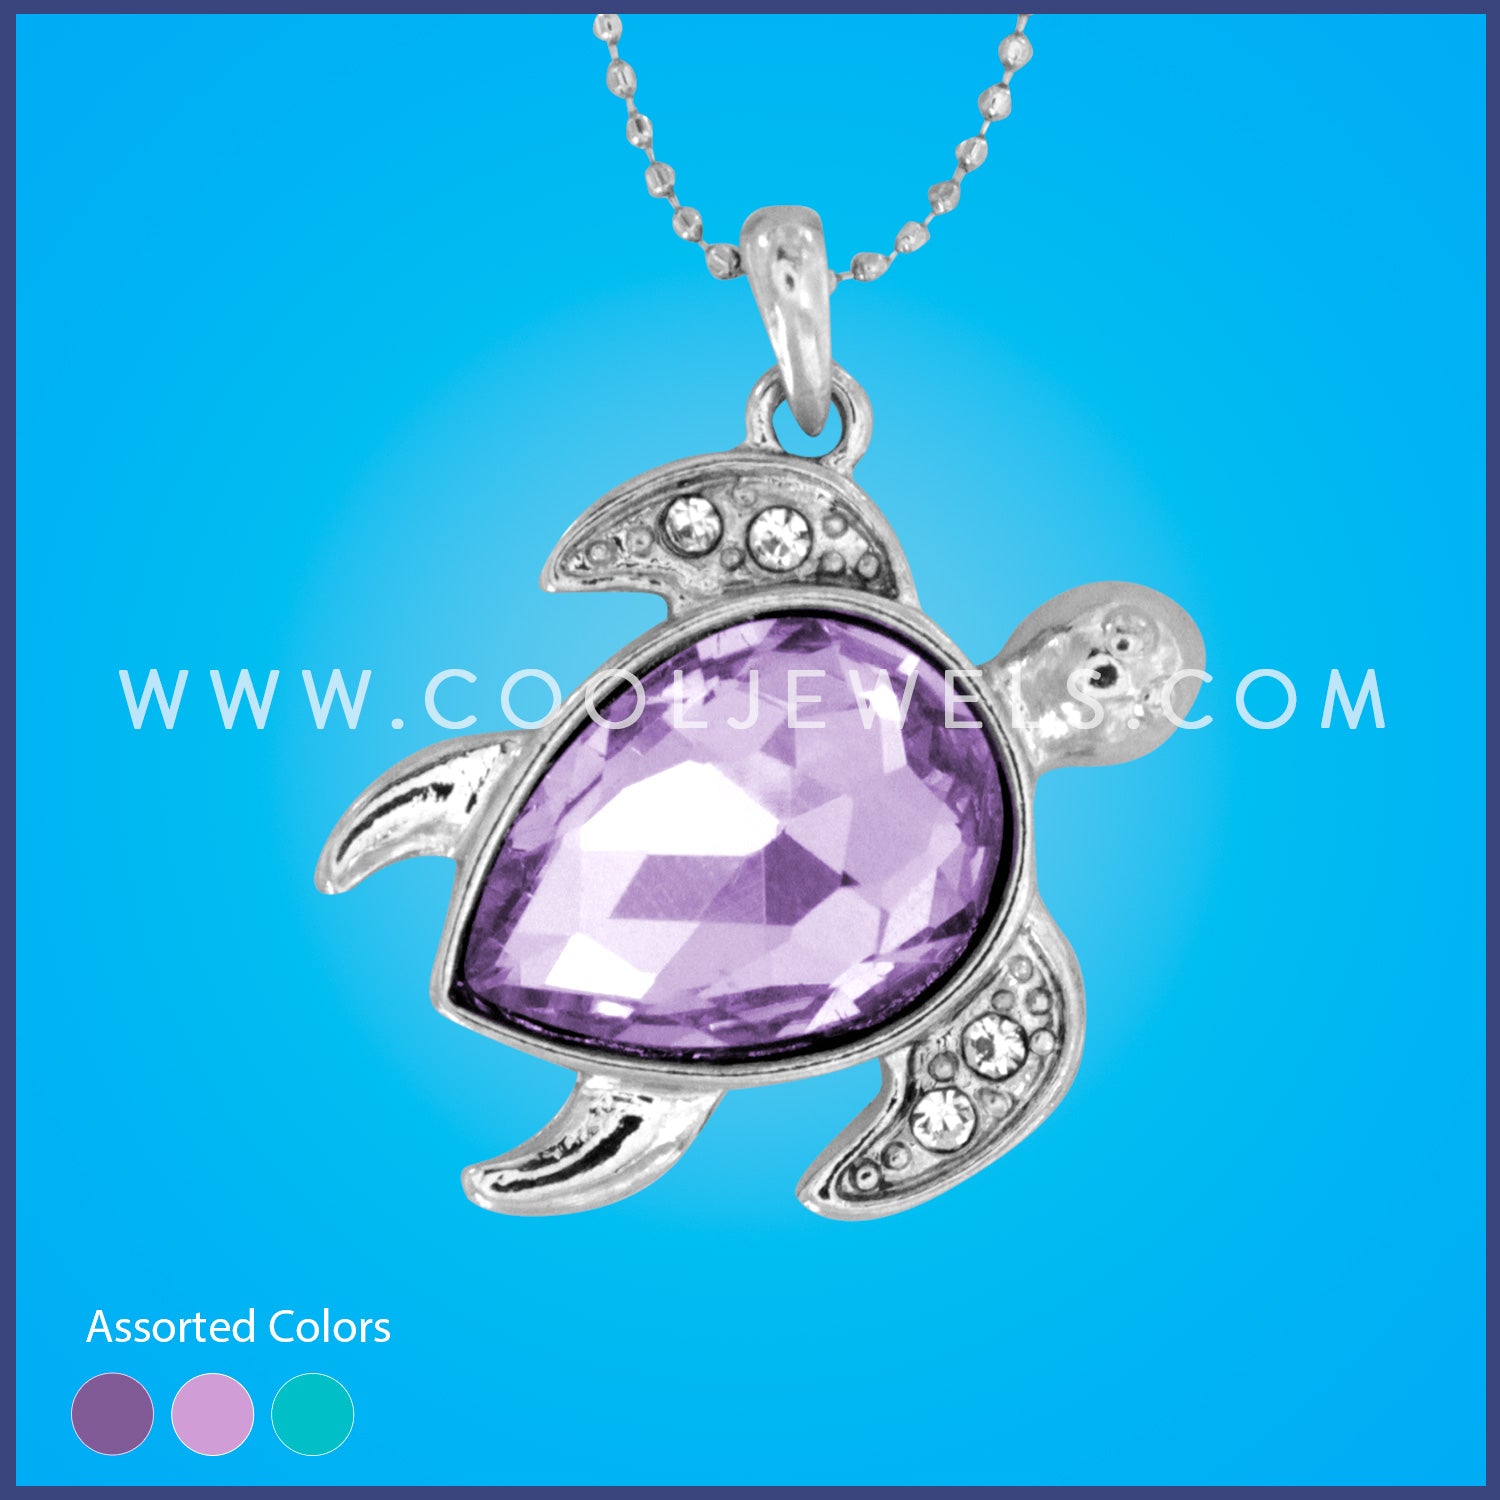 NECKLACE WITH RHINESTONE & CRYSTAL TURTLE